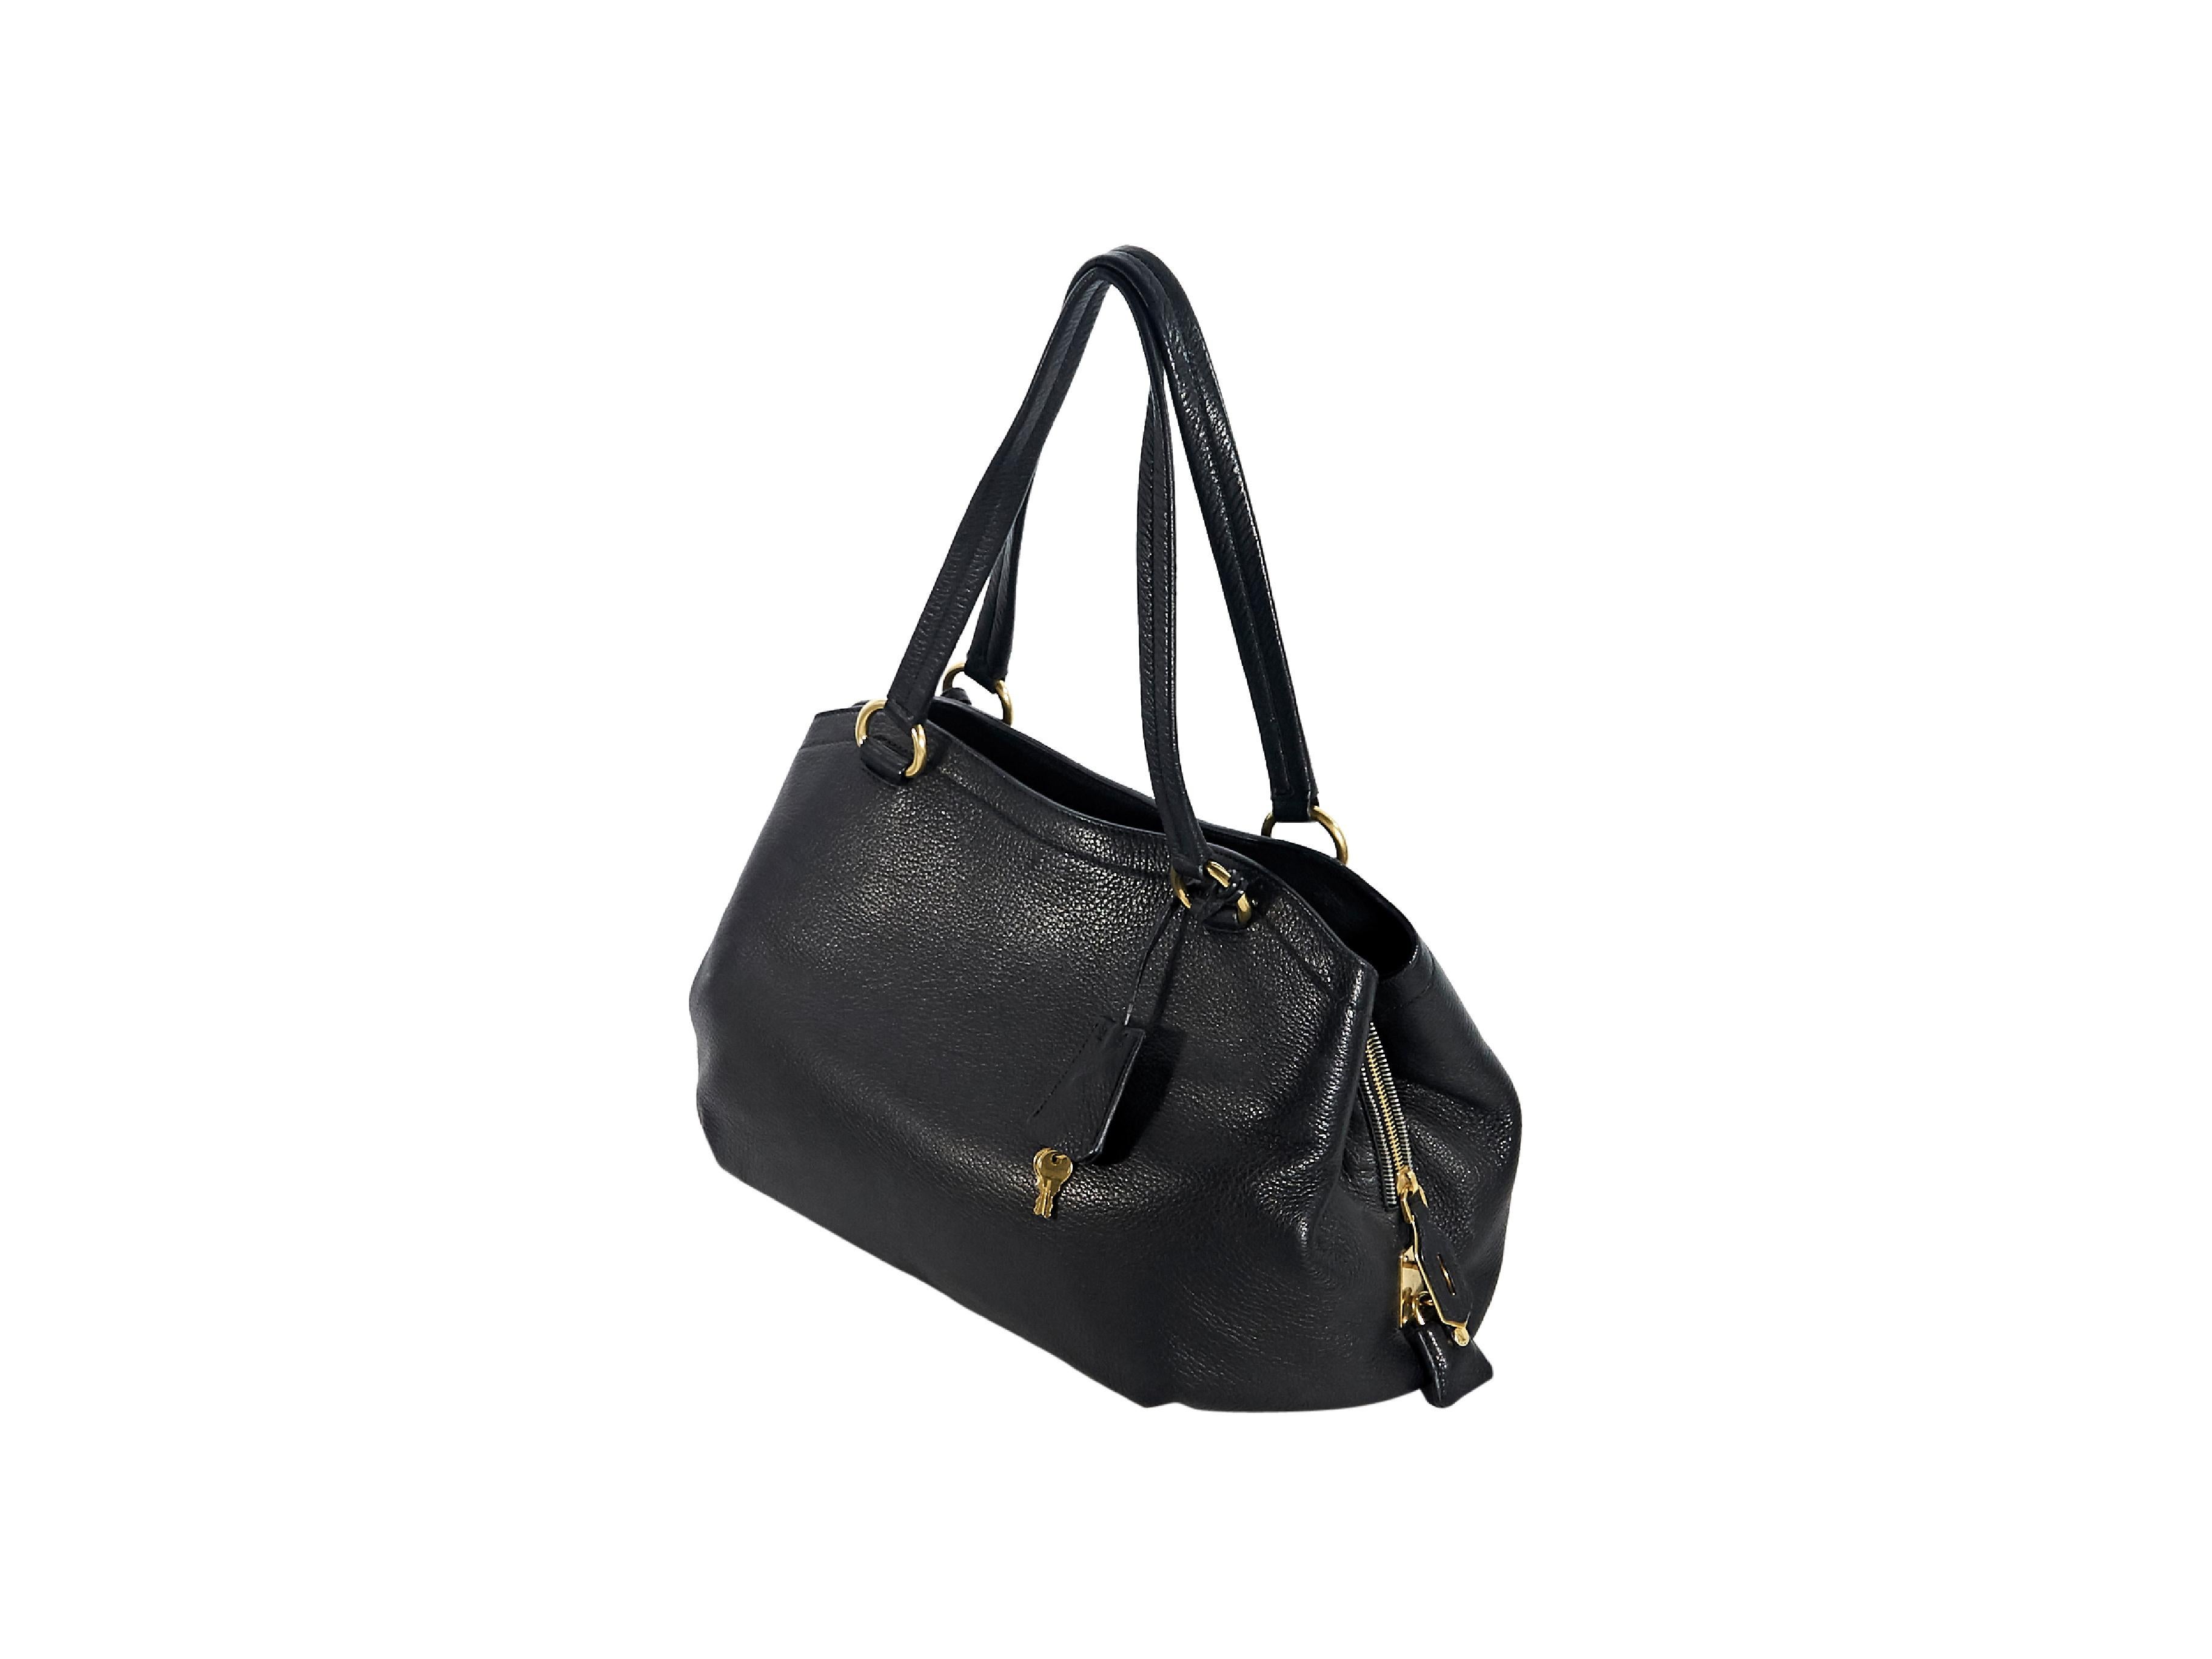 Product details:  Black leather Vitello shopper tote bag by Prada.  Dual shoulder straps.  Two snap compartments and one center zip compartment with lock and key.  Lined interior with inner zip pocket.  Side snap gussets.  Protective metal feet. 